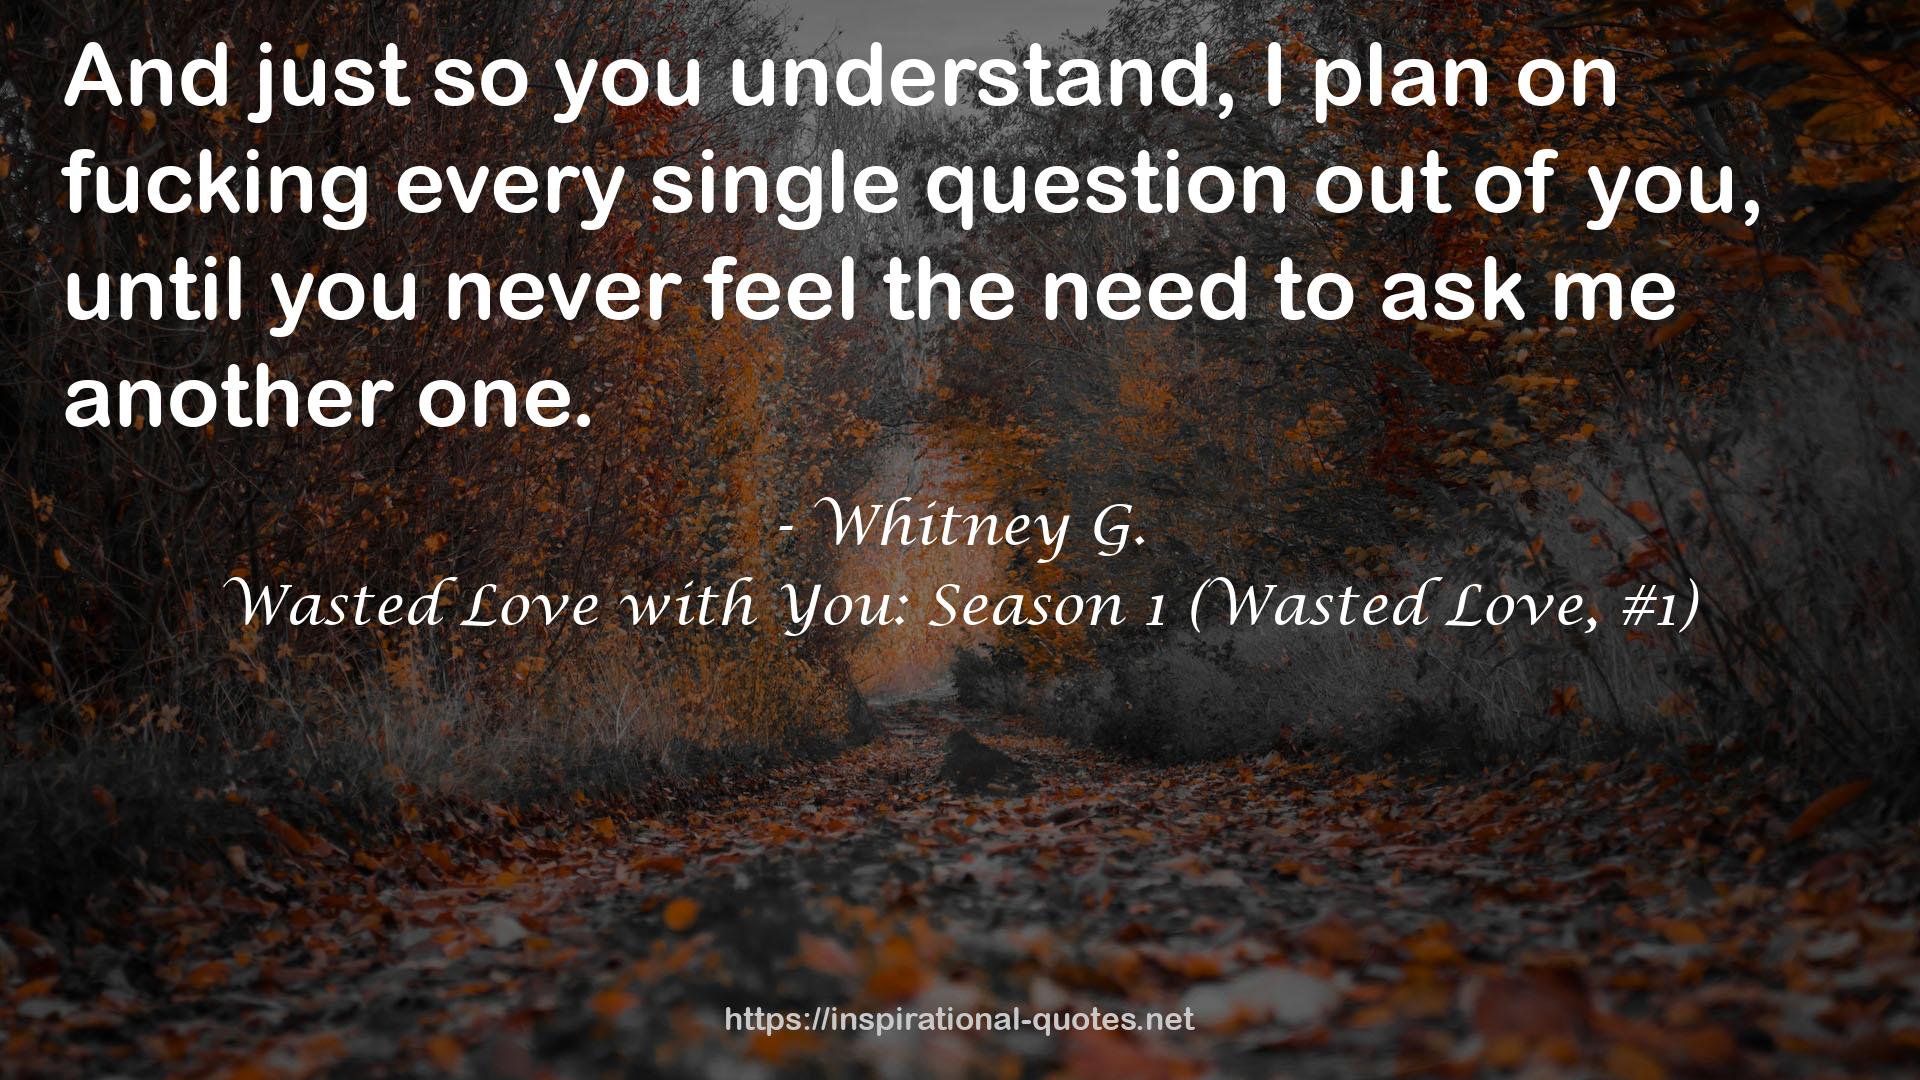 Wasted Love with You: Season 1 (Wasted Love, #1) QUOTES